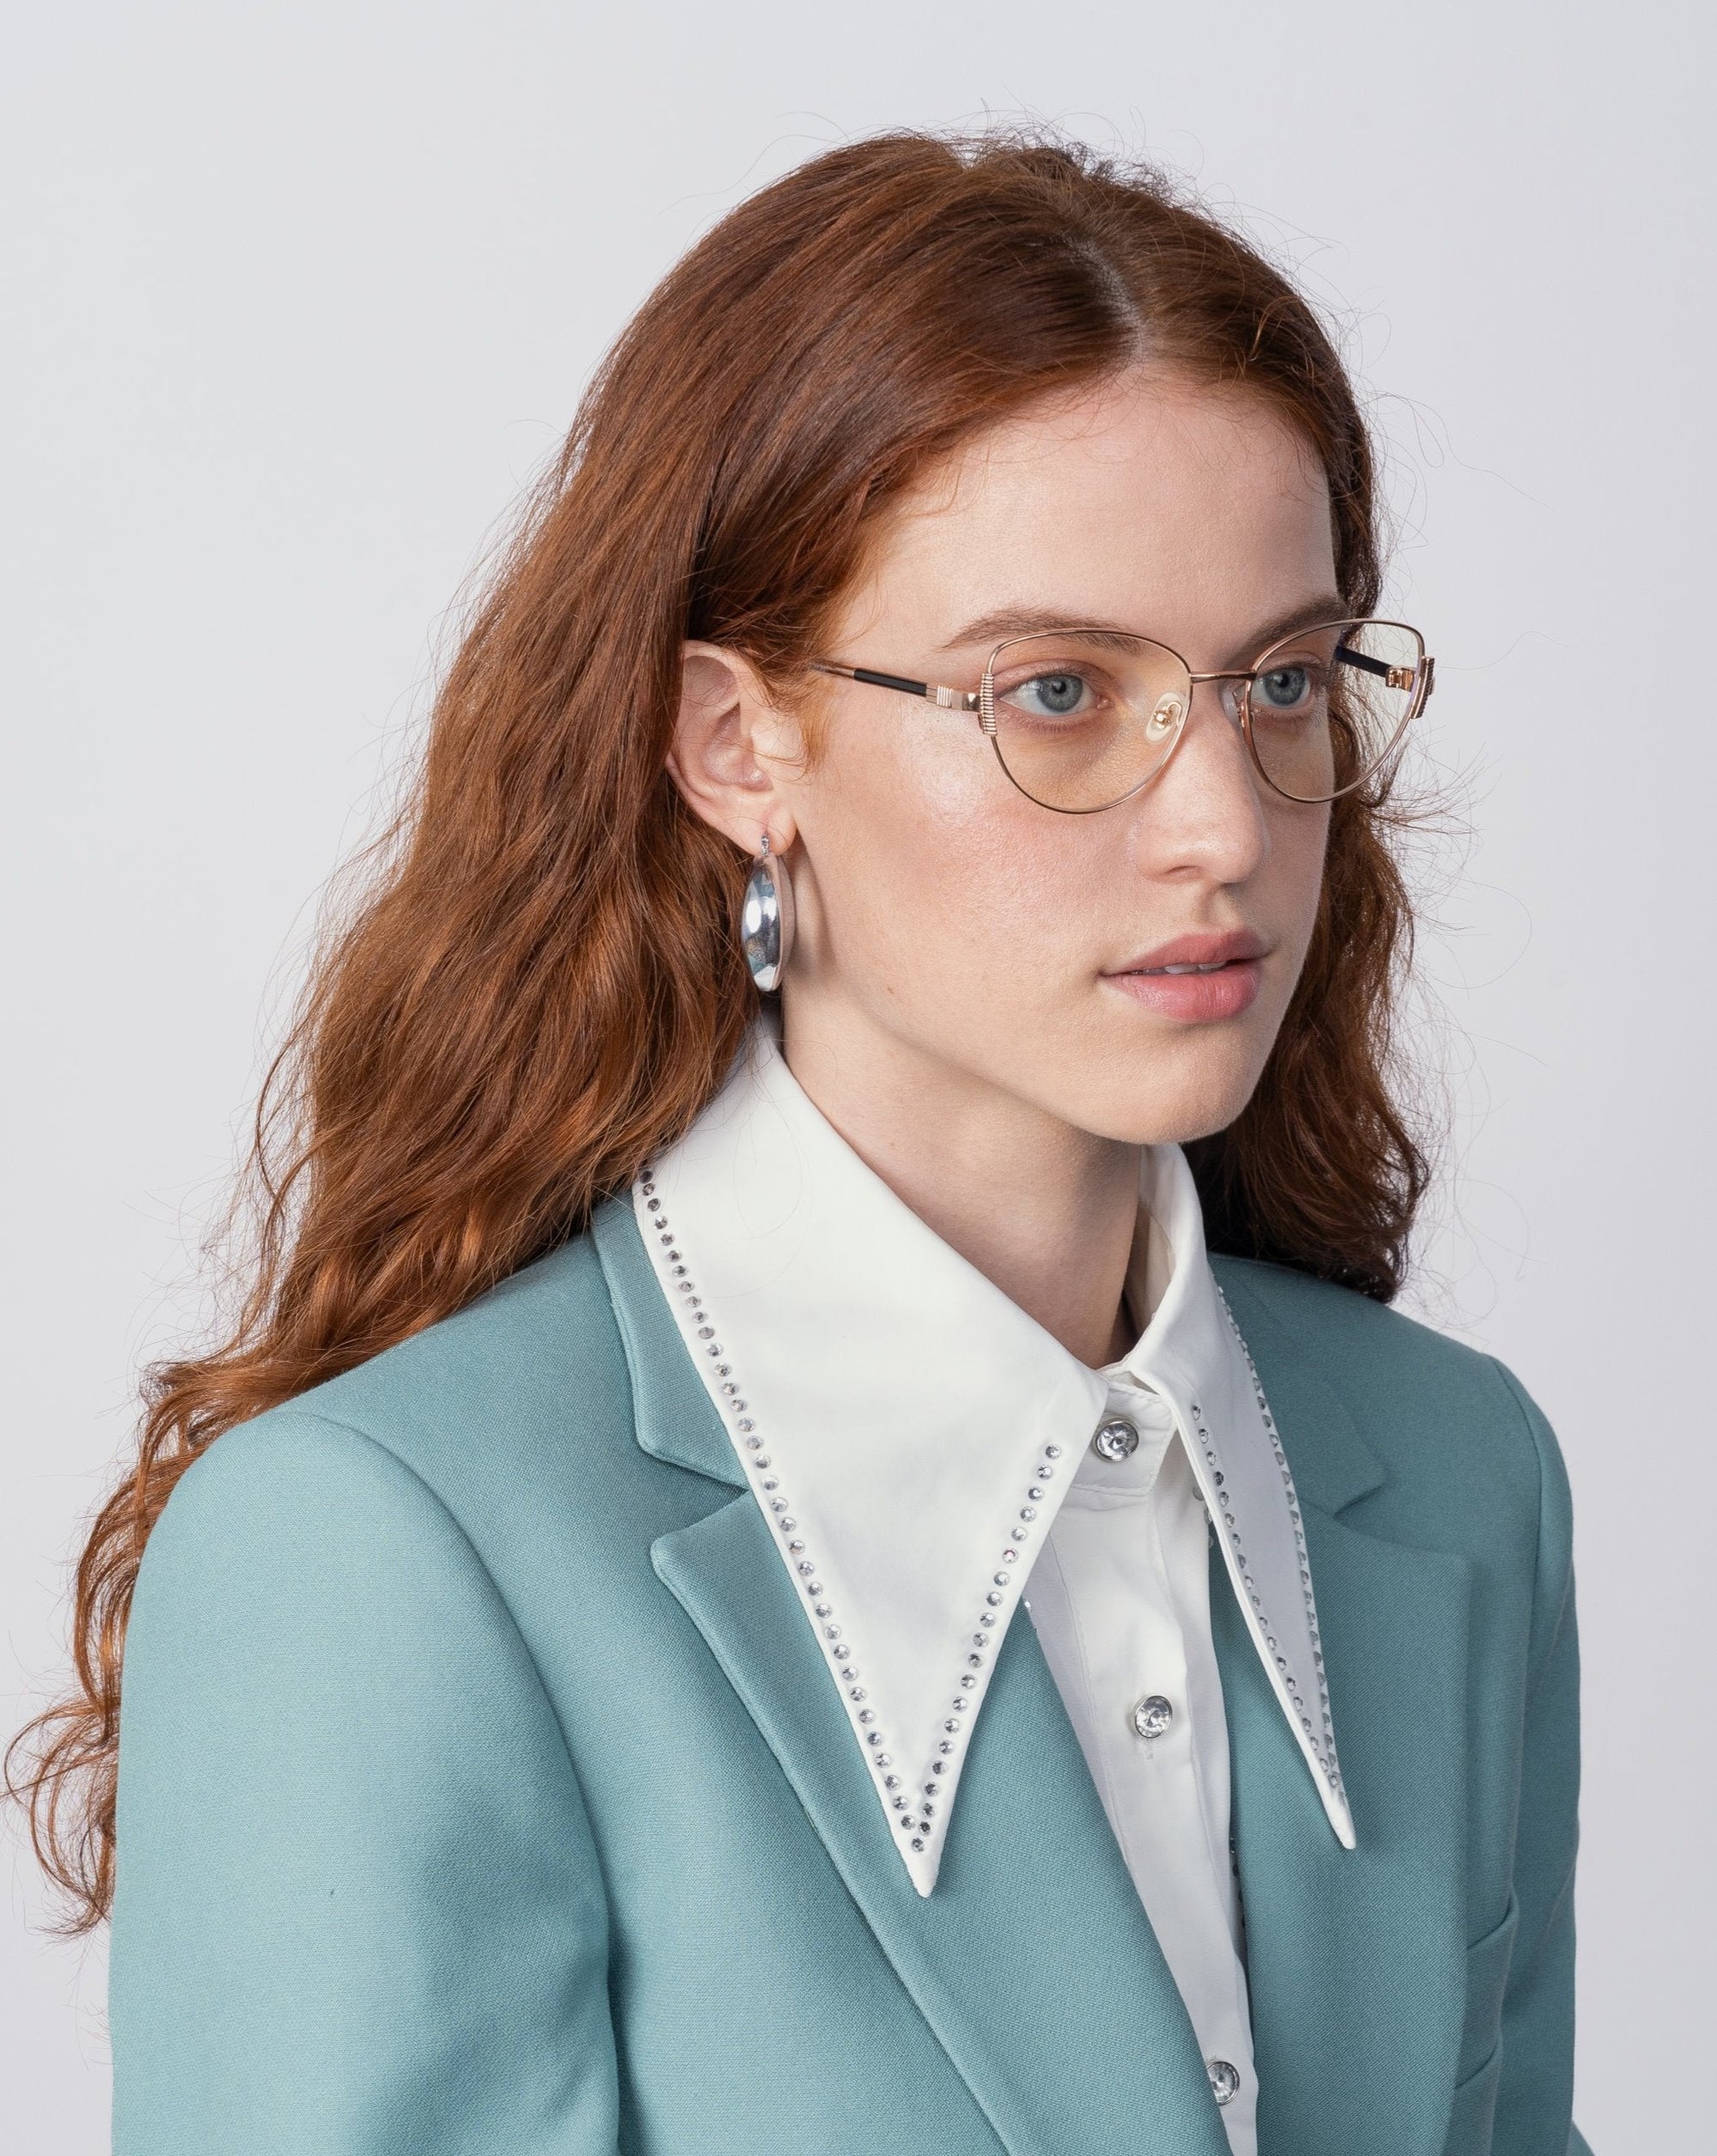 A woman with long, wavy red hair is wearing Dante eyeglasses from For Art&#39;s Sake® with blue light filter lenses, silver hoop earrings, and a light blue blazer over a white shirt with a wide, pointed collar. She is looking slightly to the side against a plain, light background.